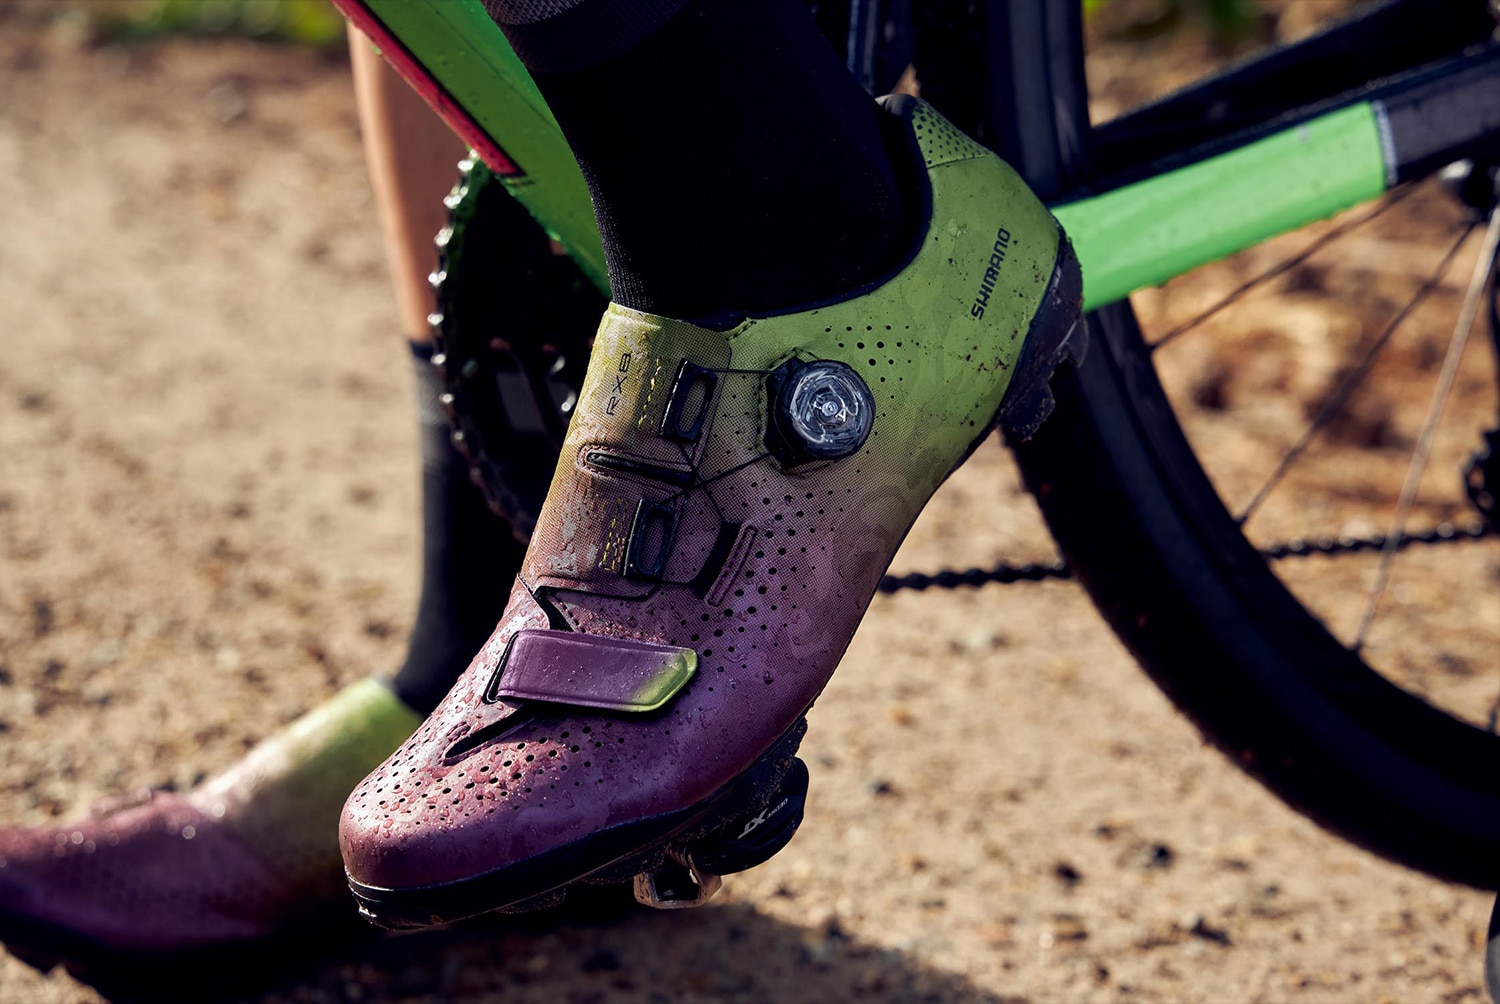 Model wearing Shimano SH-RX800 Purple and Green SPD Gravel shoes